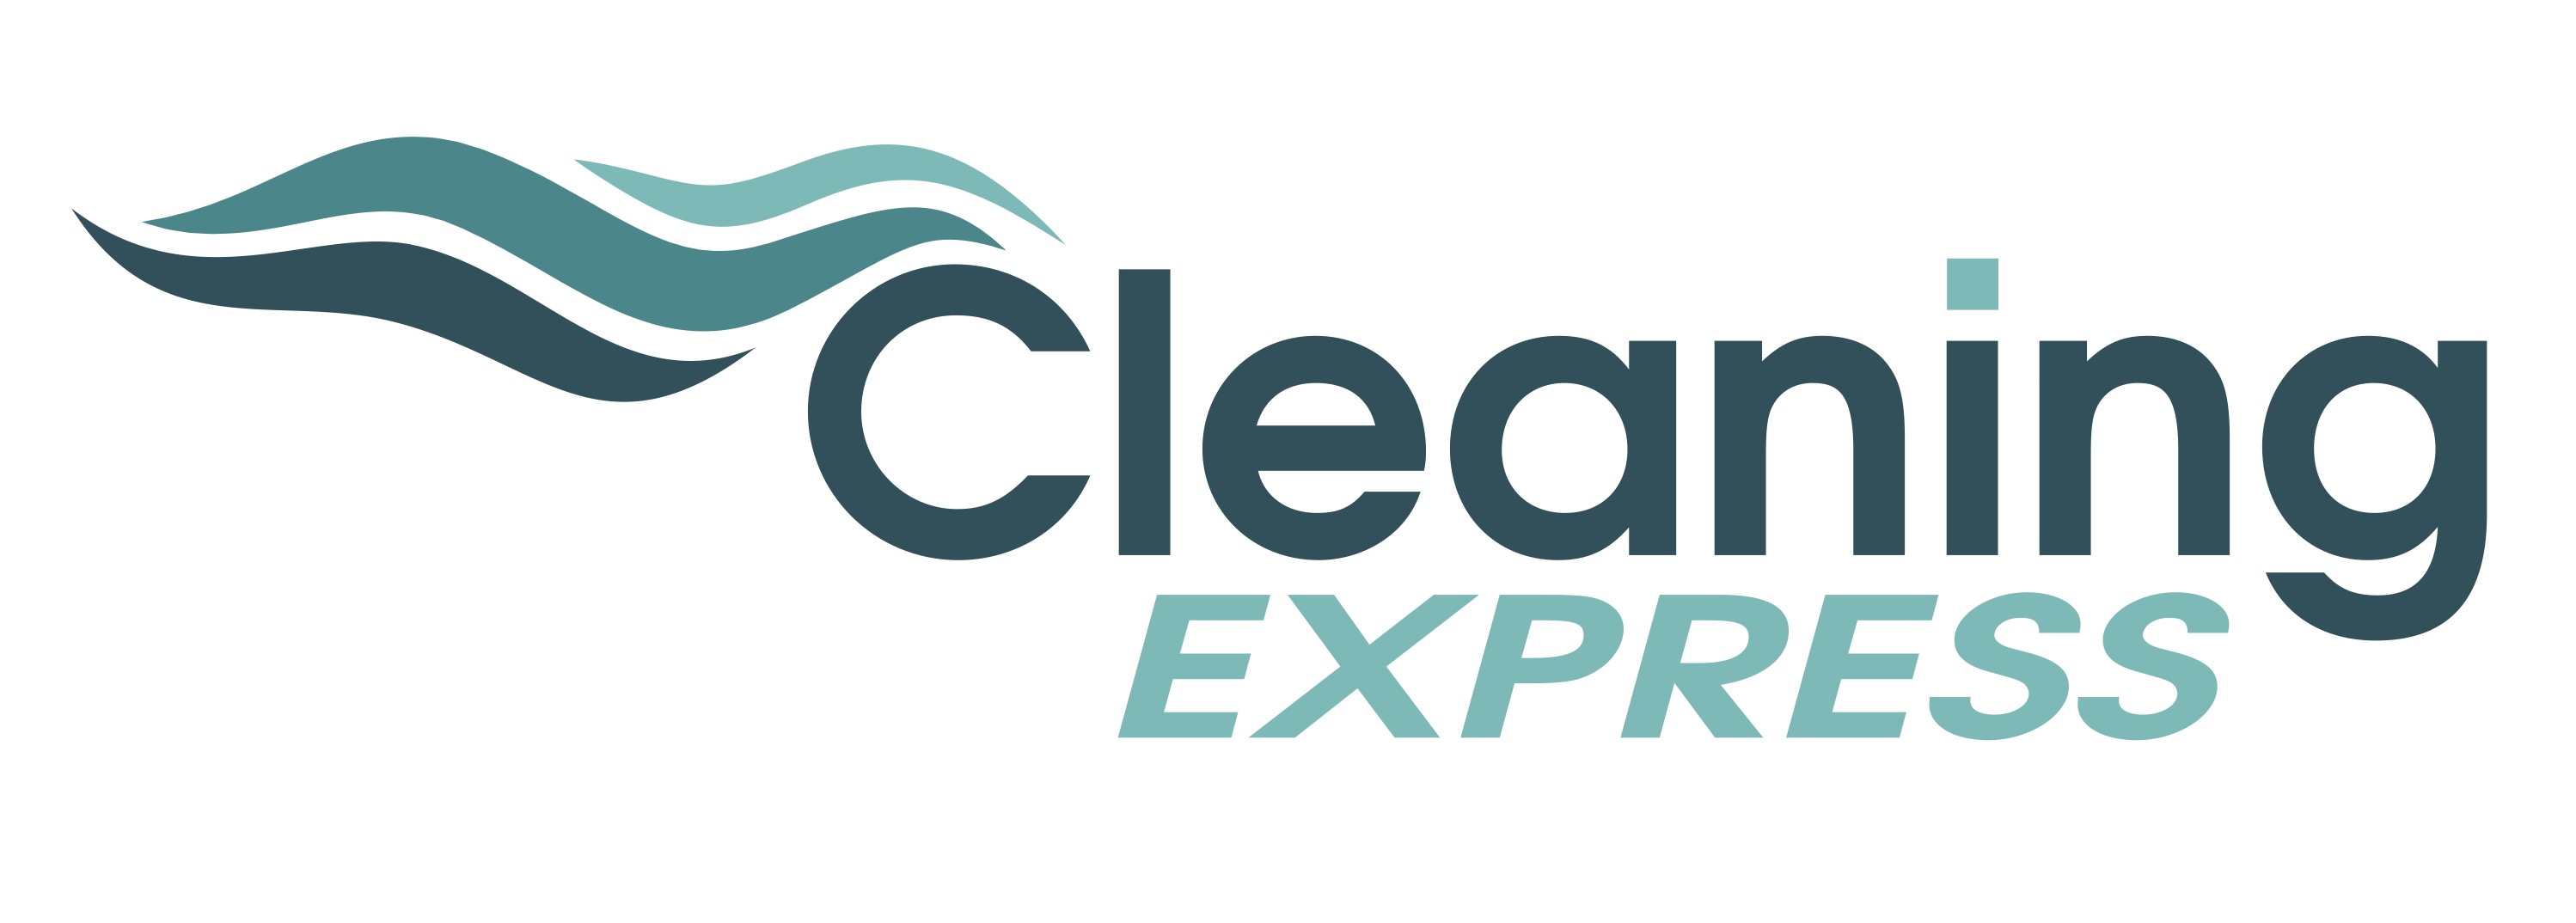 logo for Cleaning Express Services Ltd